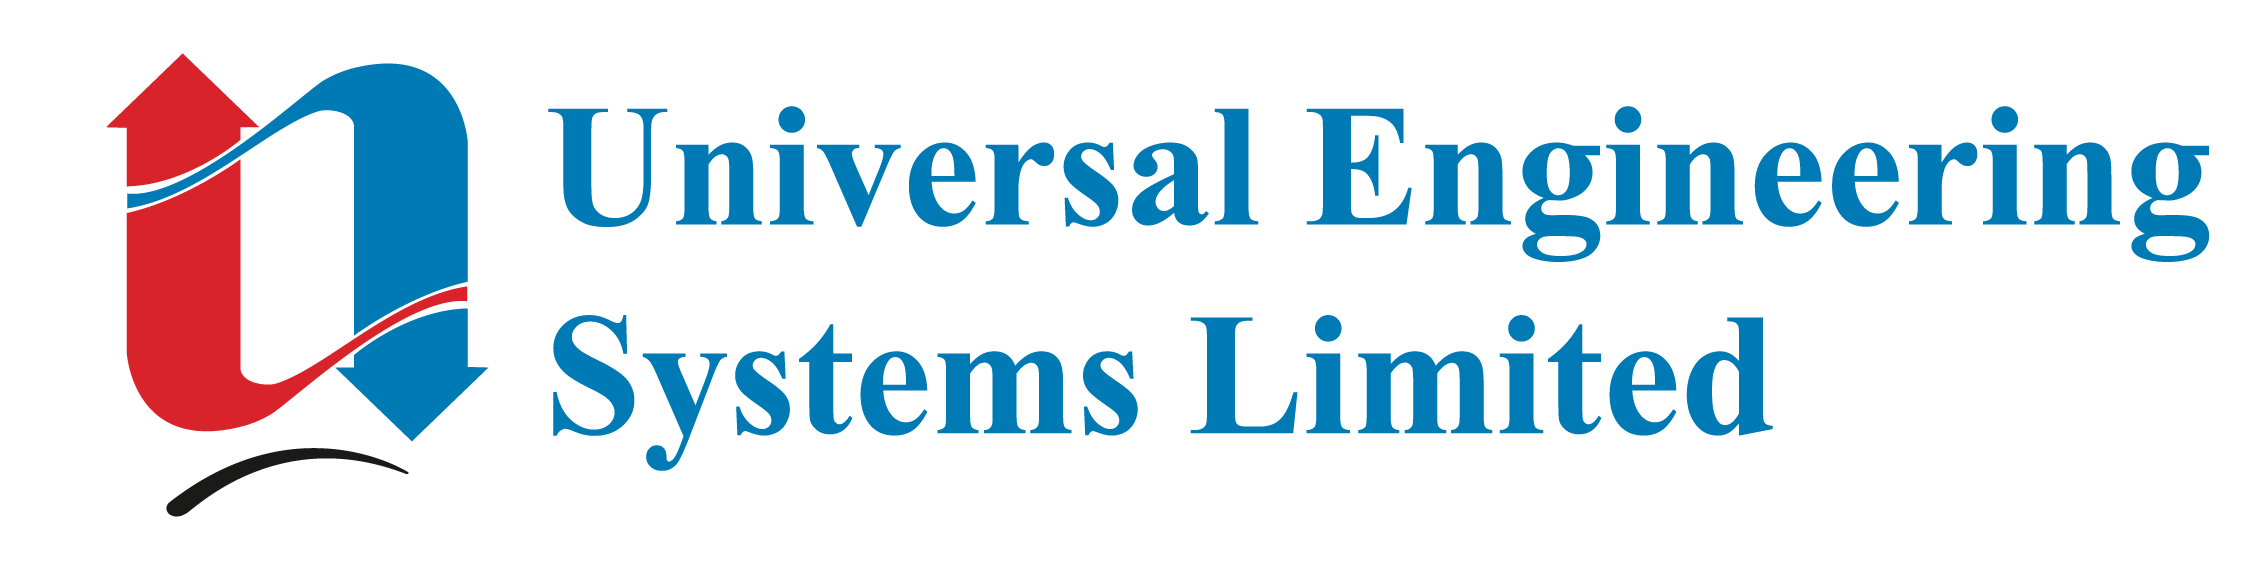 Universal Engineering Systems Limited